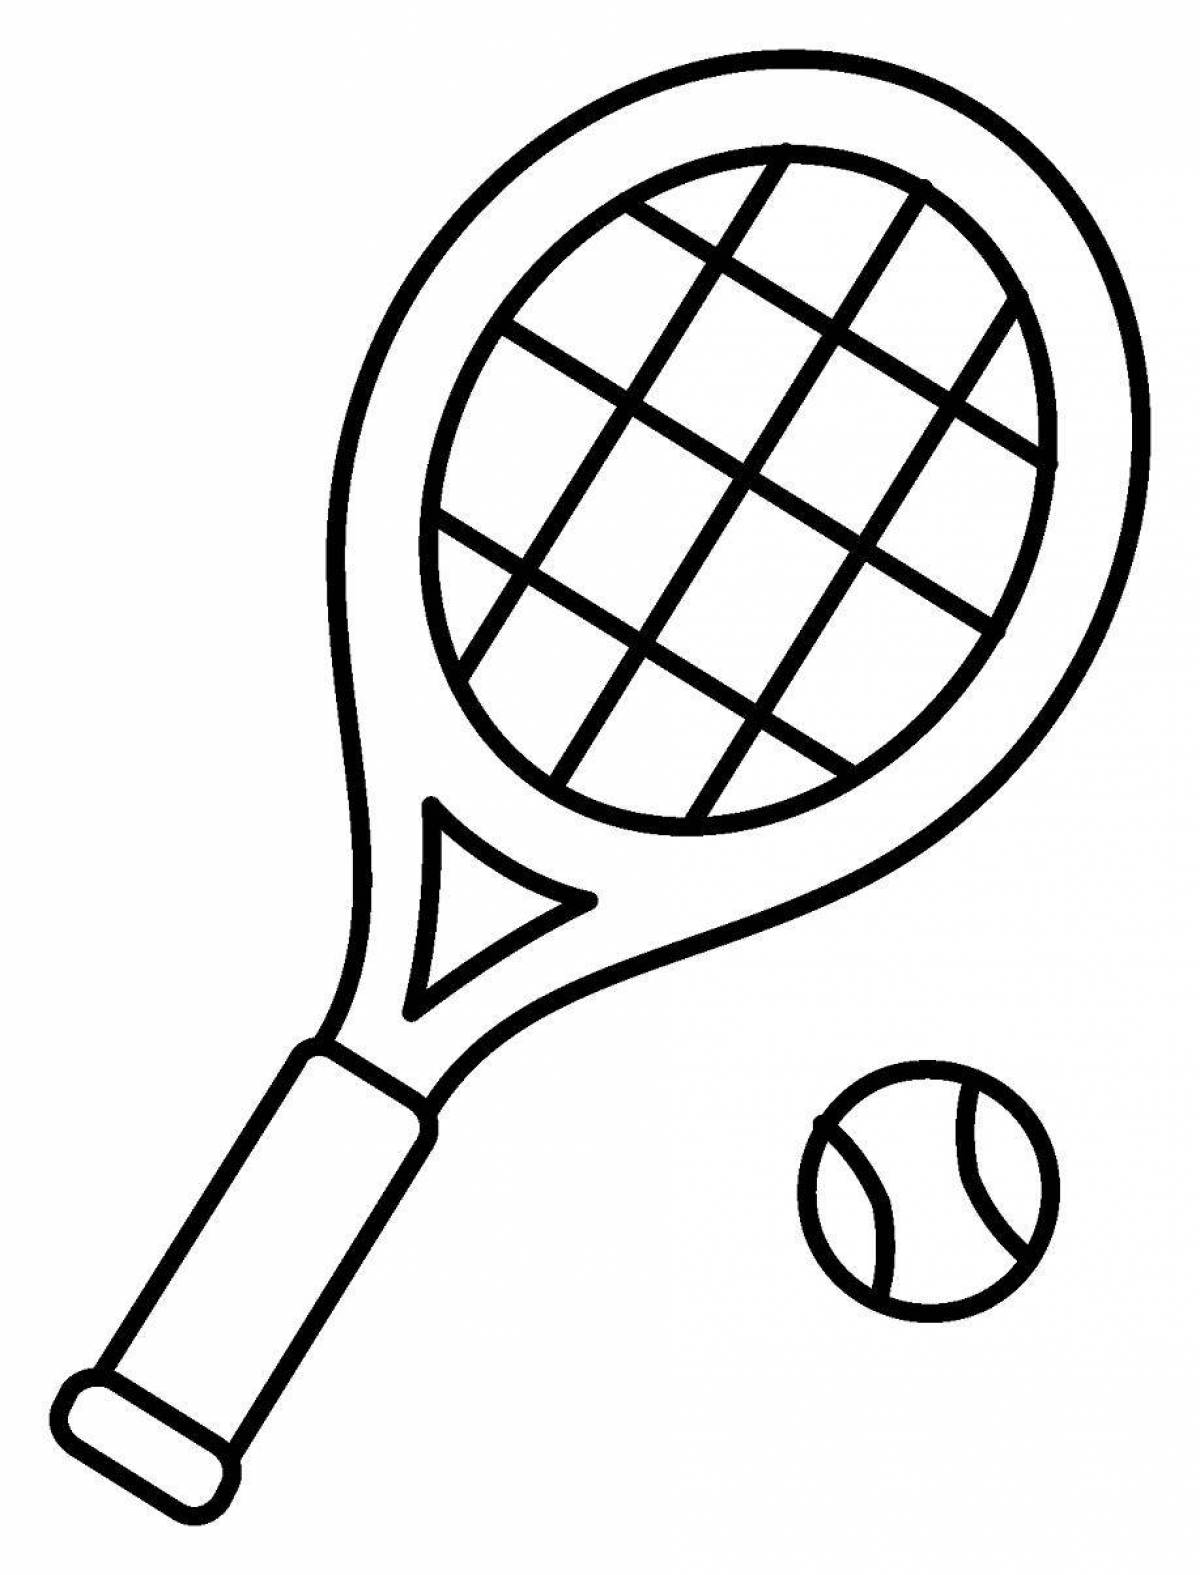 Colorful tennis racket coloring page